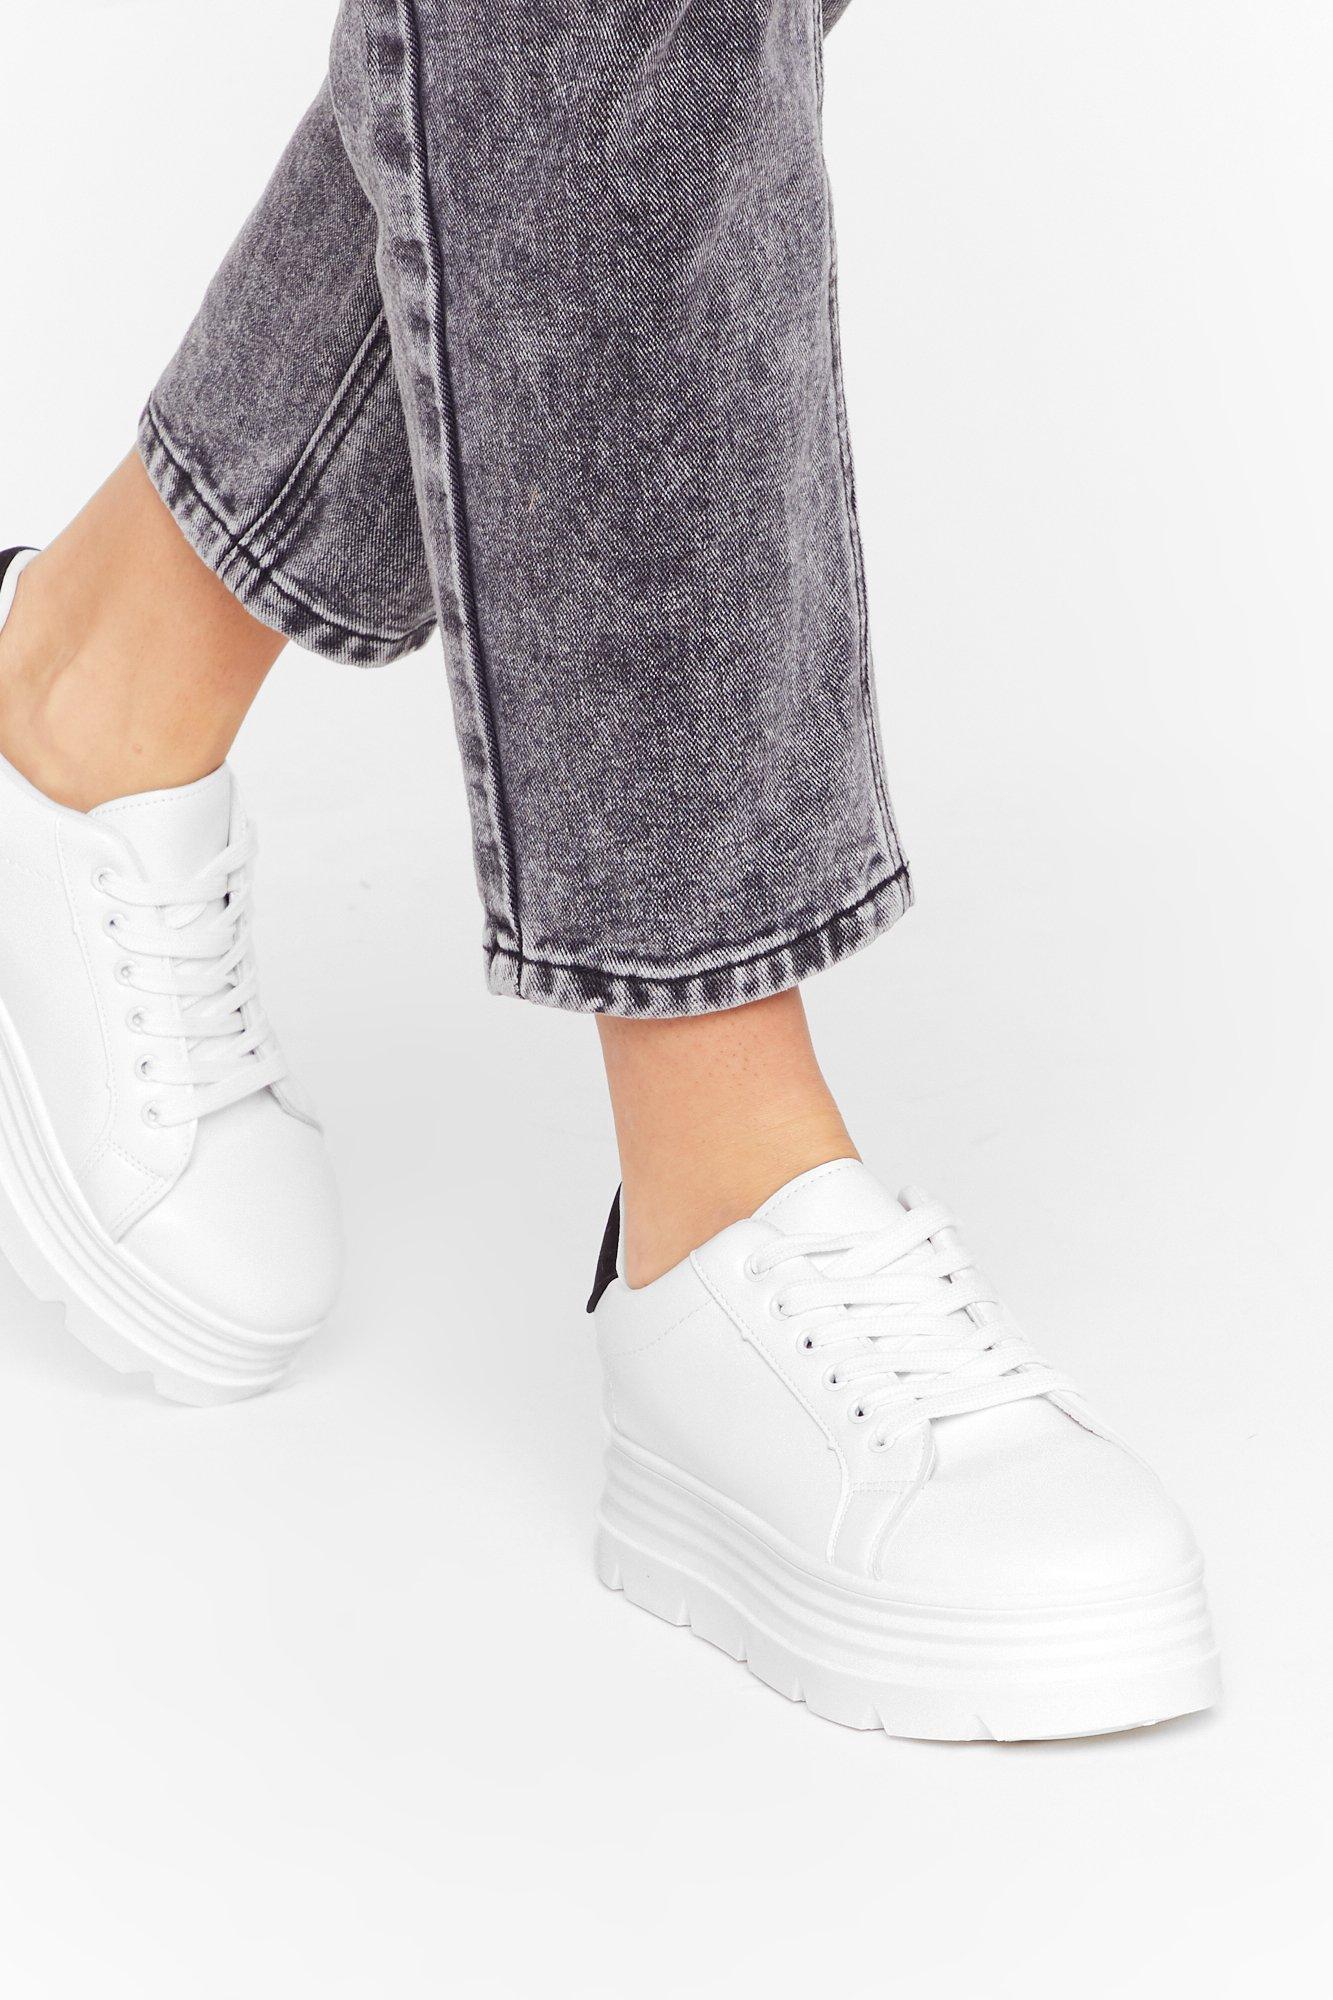 white platform leather trainers